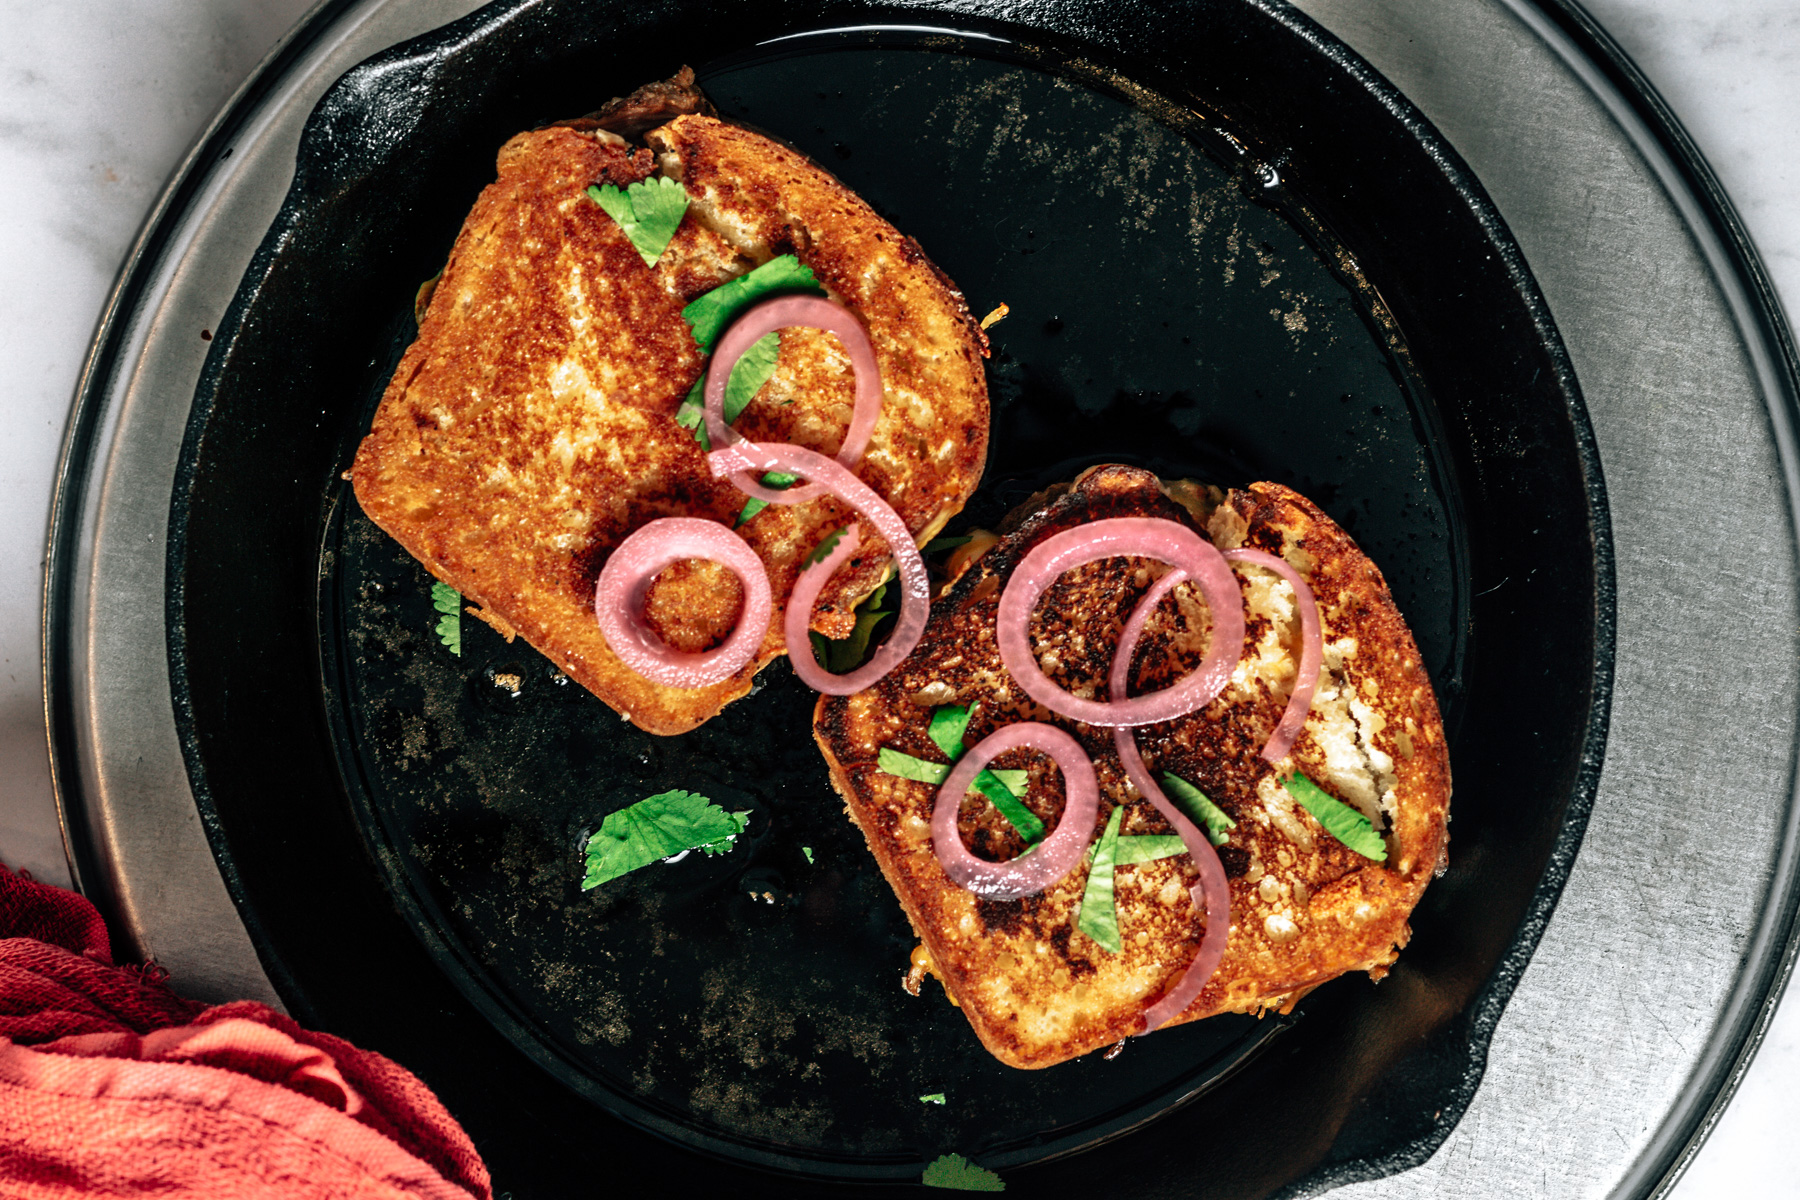 Pulled pork grilled cheese sandwich - chili & tonic